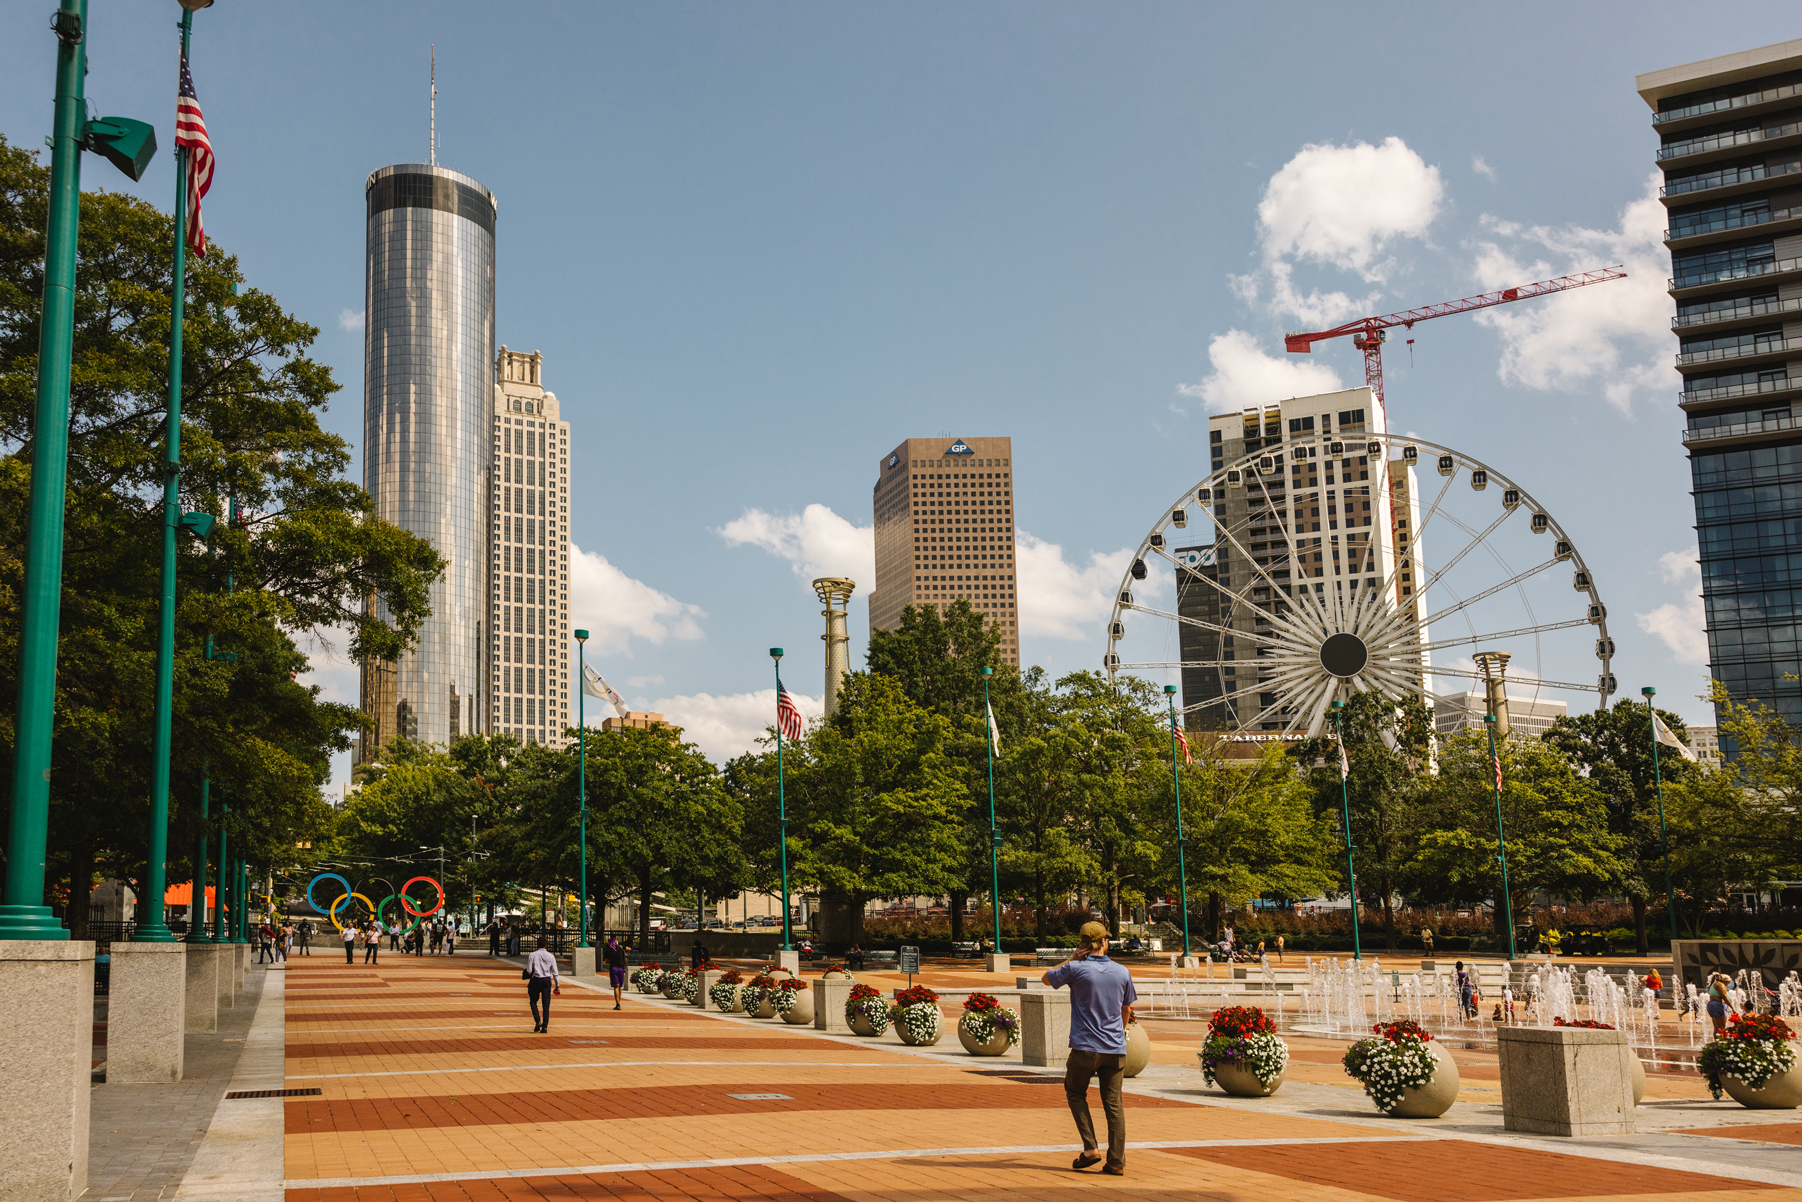 Atlanta, Georgia is the #1 Best Place to Live